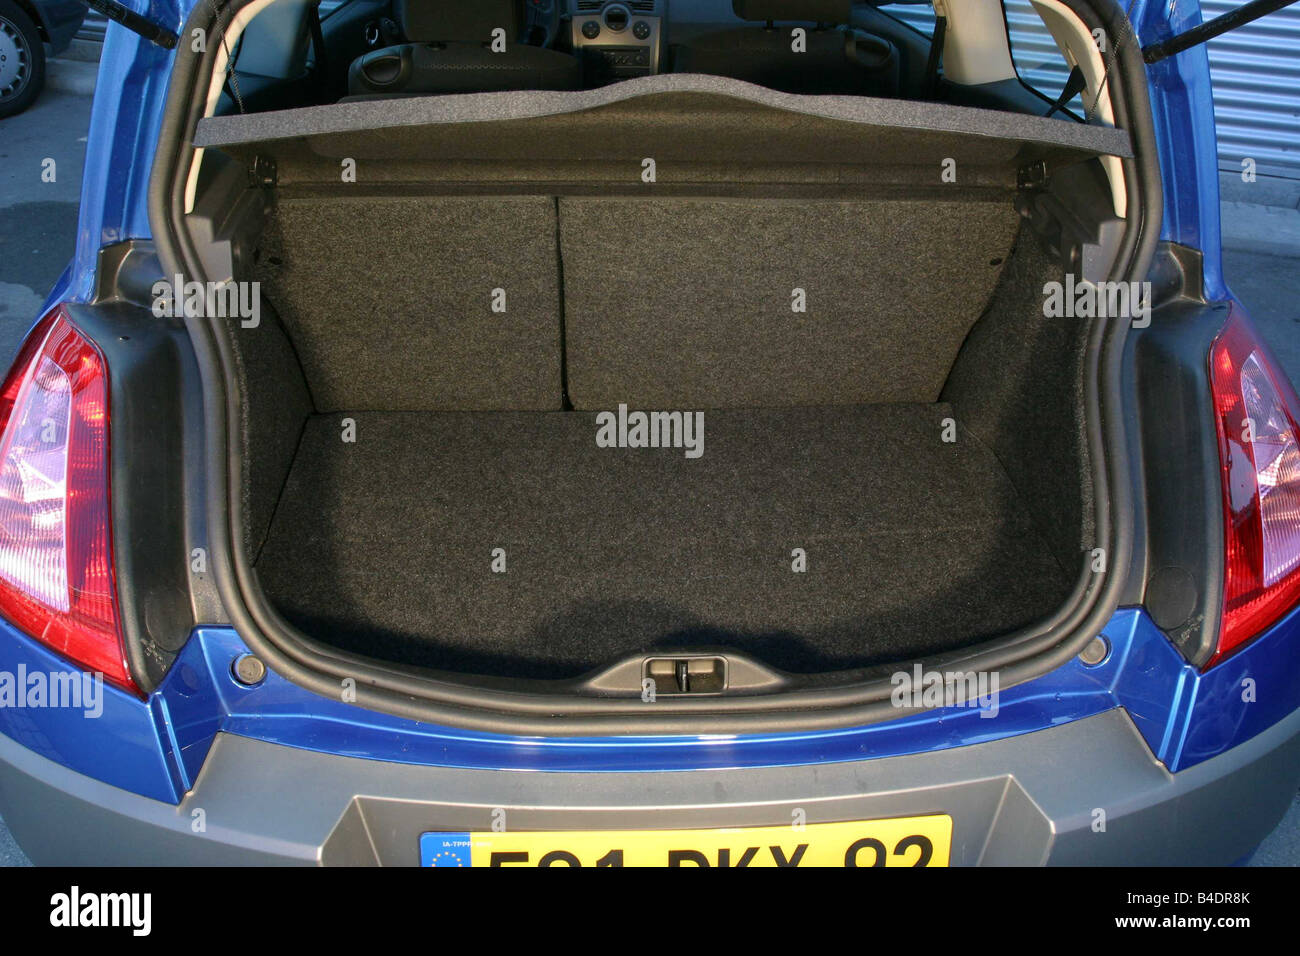 Car, Renault Mégane 1.9 dCi, Megane, Limousine, Lower middle-sized class,  model year 2000-, blue, view into boot, technique/acce Stock Photo - Alamy